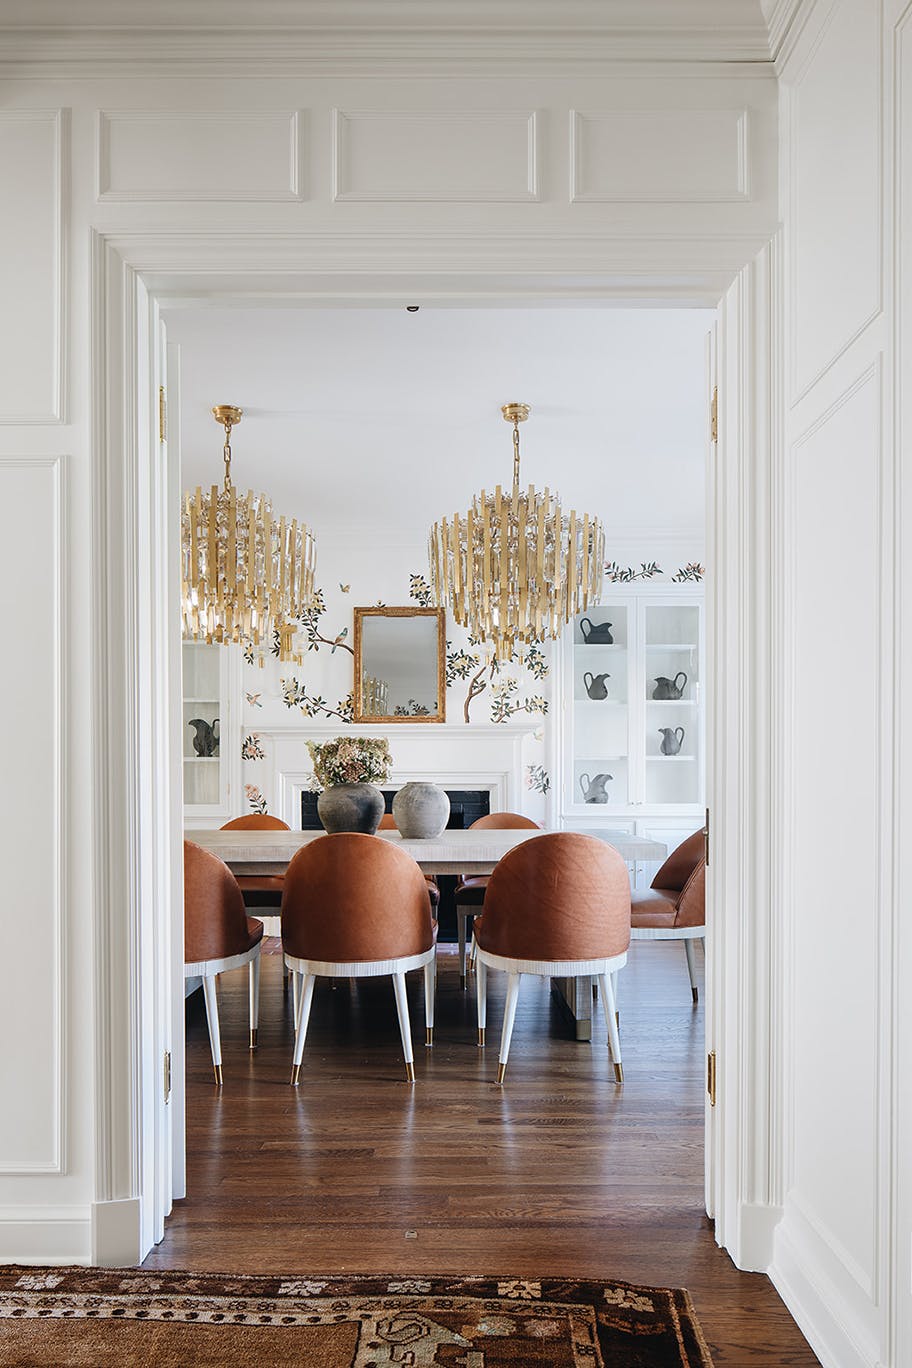 Nicole-Green-Design-Project-Chevy-Chase-Historic-East-Coast-Home-Dining-Room